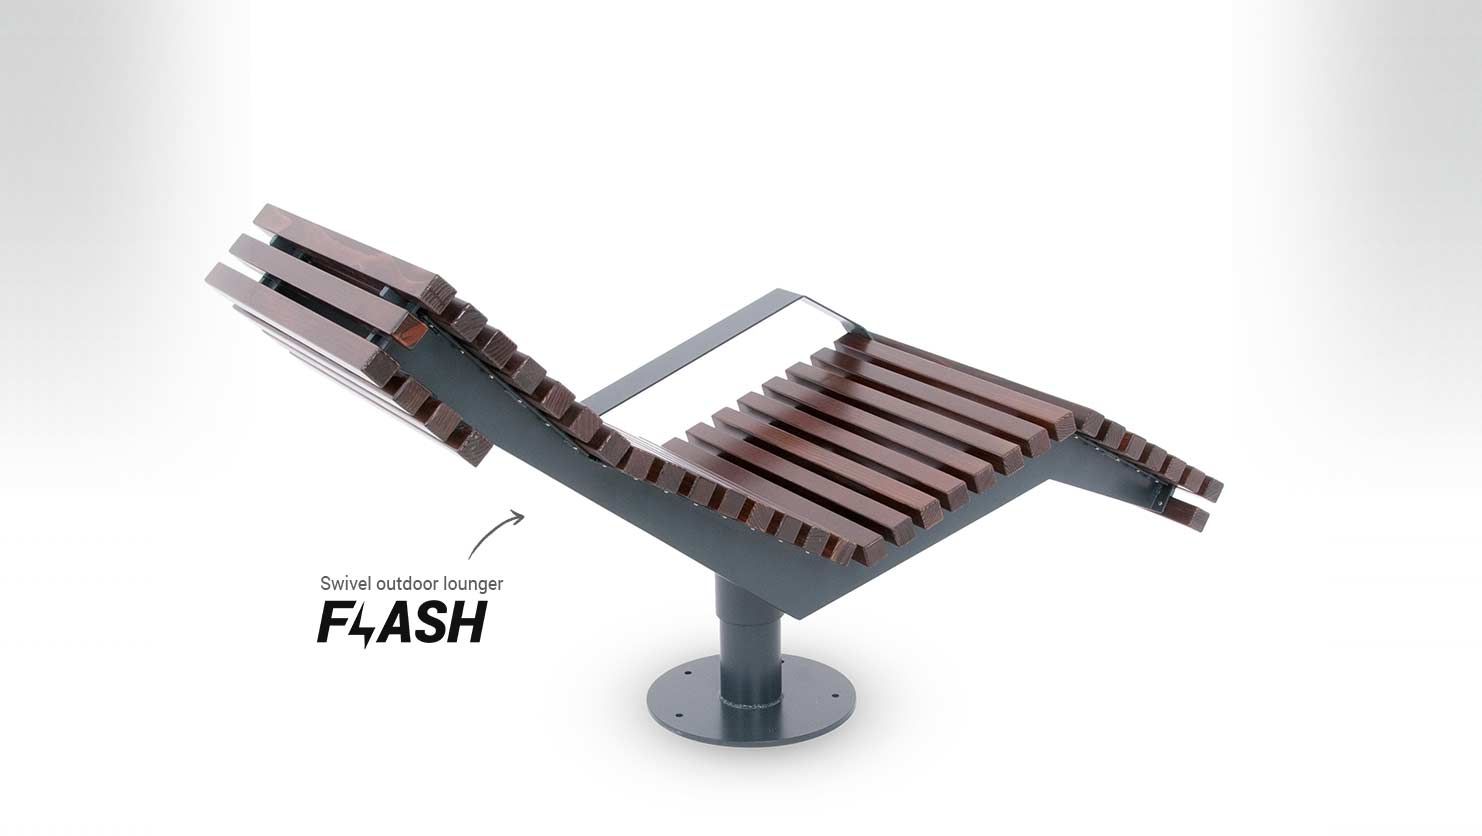 Outdoor solid swivel lounger perfect for walkways and parks, made of carbon steel and spruce wood